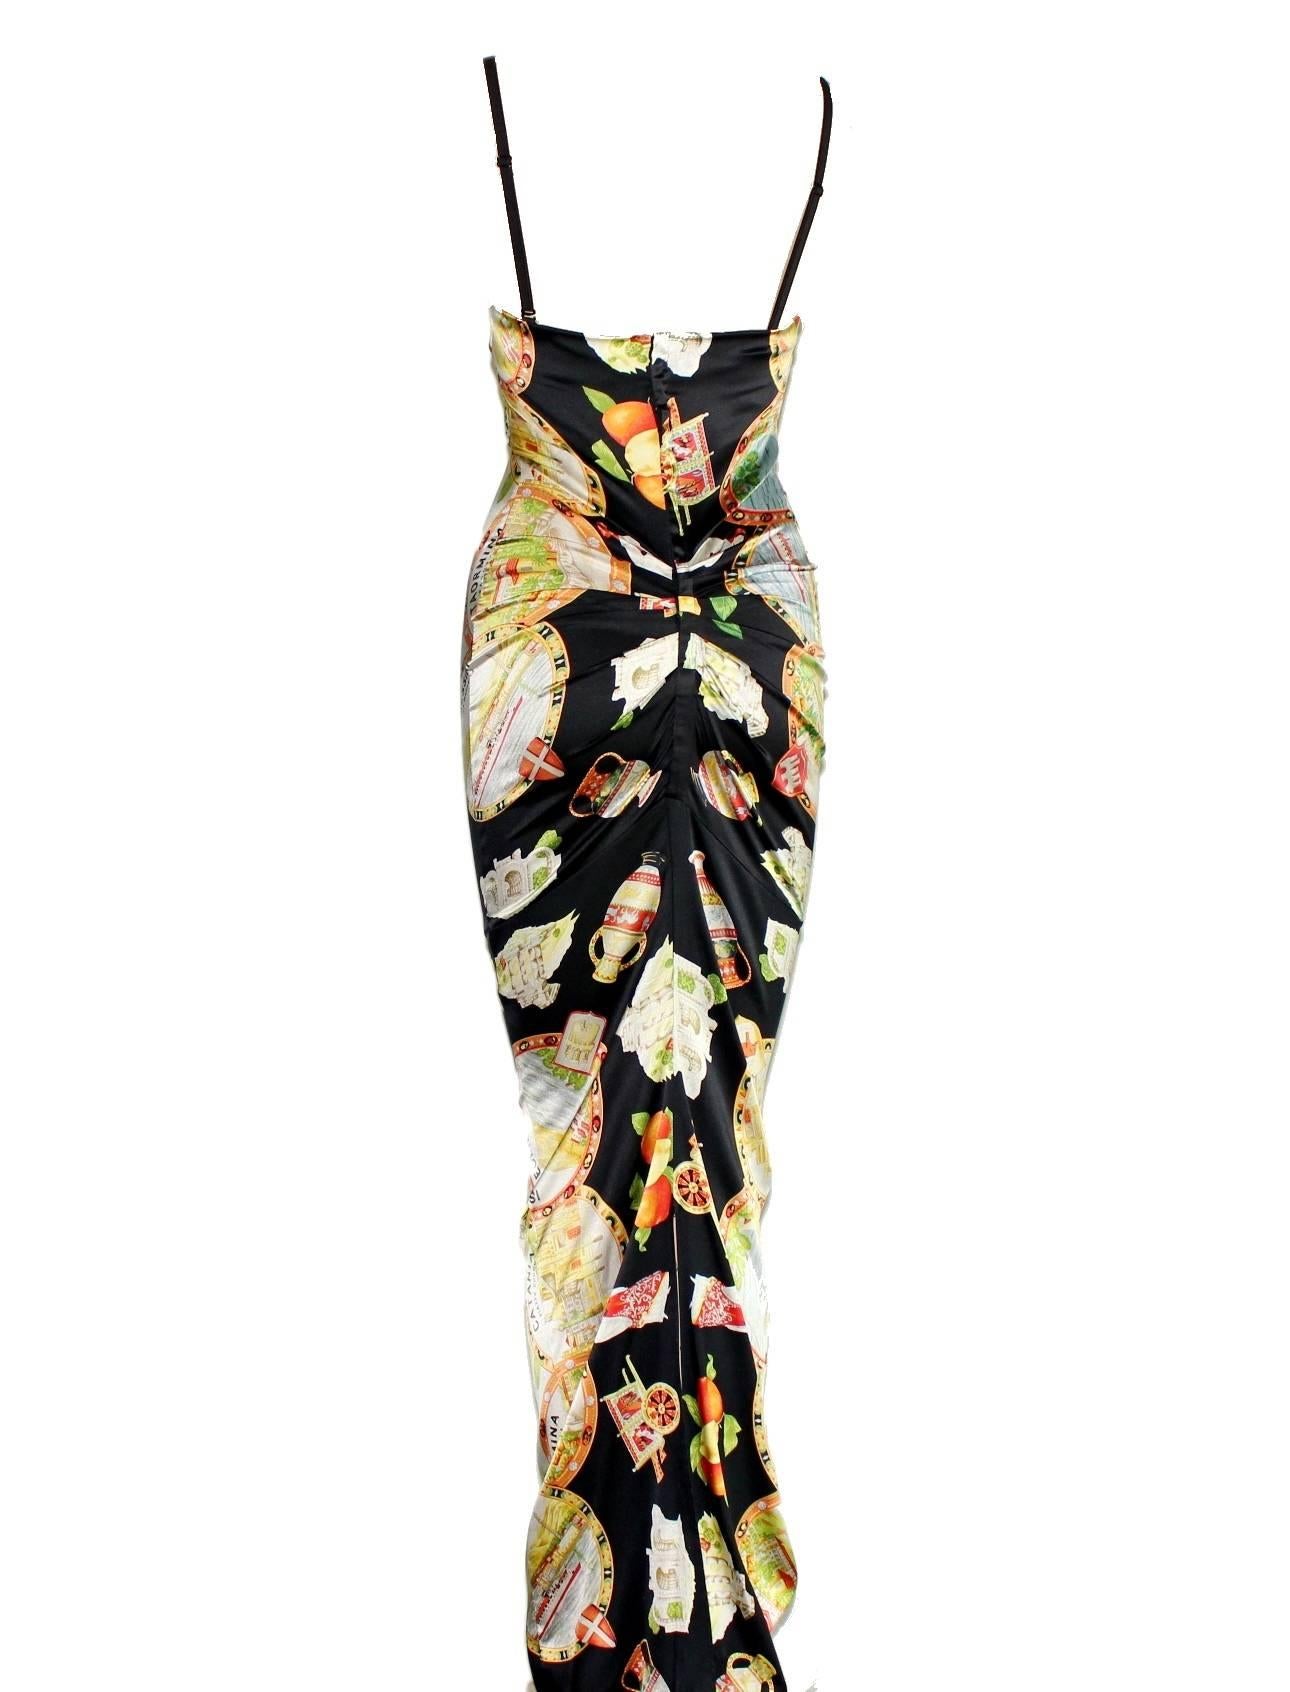 BREATHTAKING

DOLCE & GABBANA

SICILY PRINT CORSET GOWN

COLLECTOR'S PIECE

ALREADY PART OF FIT MUSEUM'S COLLECTION

DETAILS:

    A DOLCE & GABBANA classic signature piece that will last you for years
    From the famous 1998 collection
   